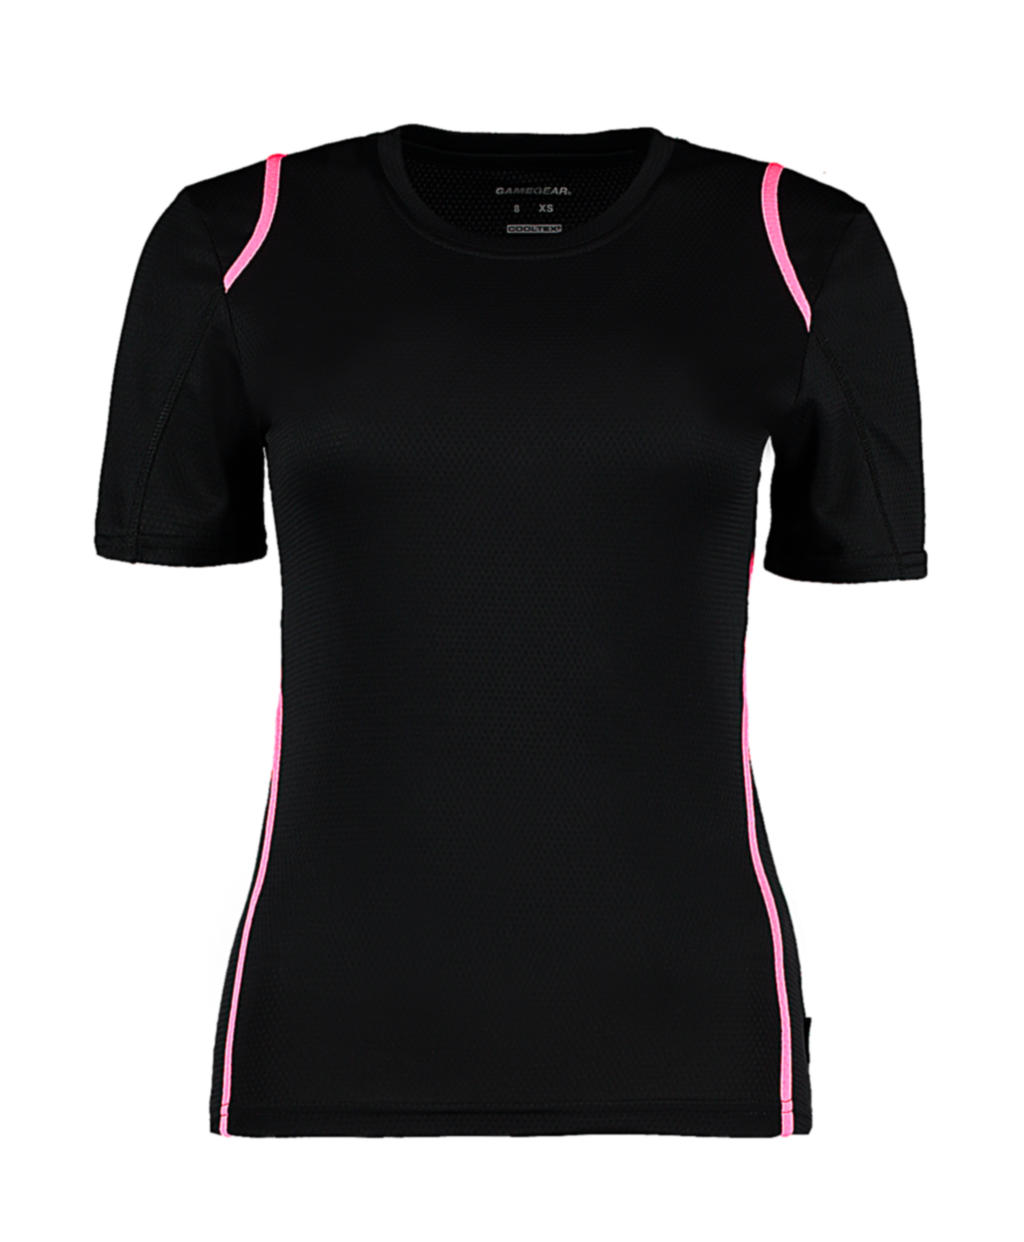  Womens Regular Fit Cooltex? Contrast Tee in Farbe Black/Fluorescent Pink